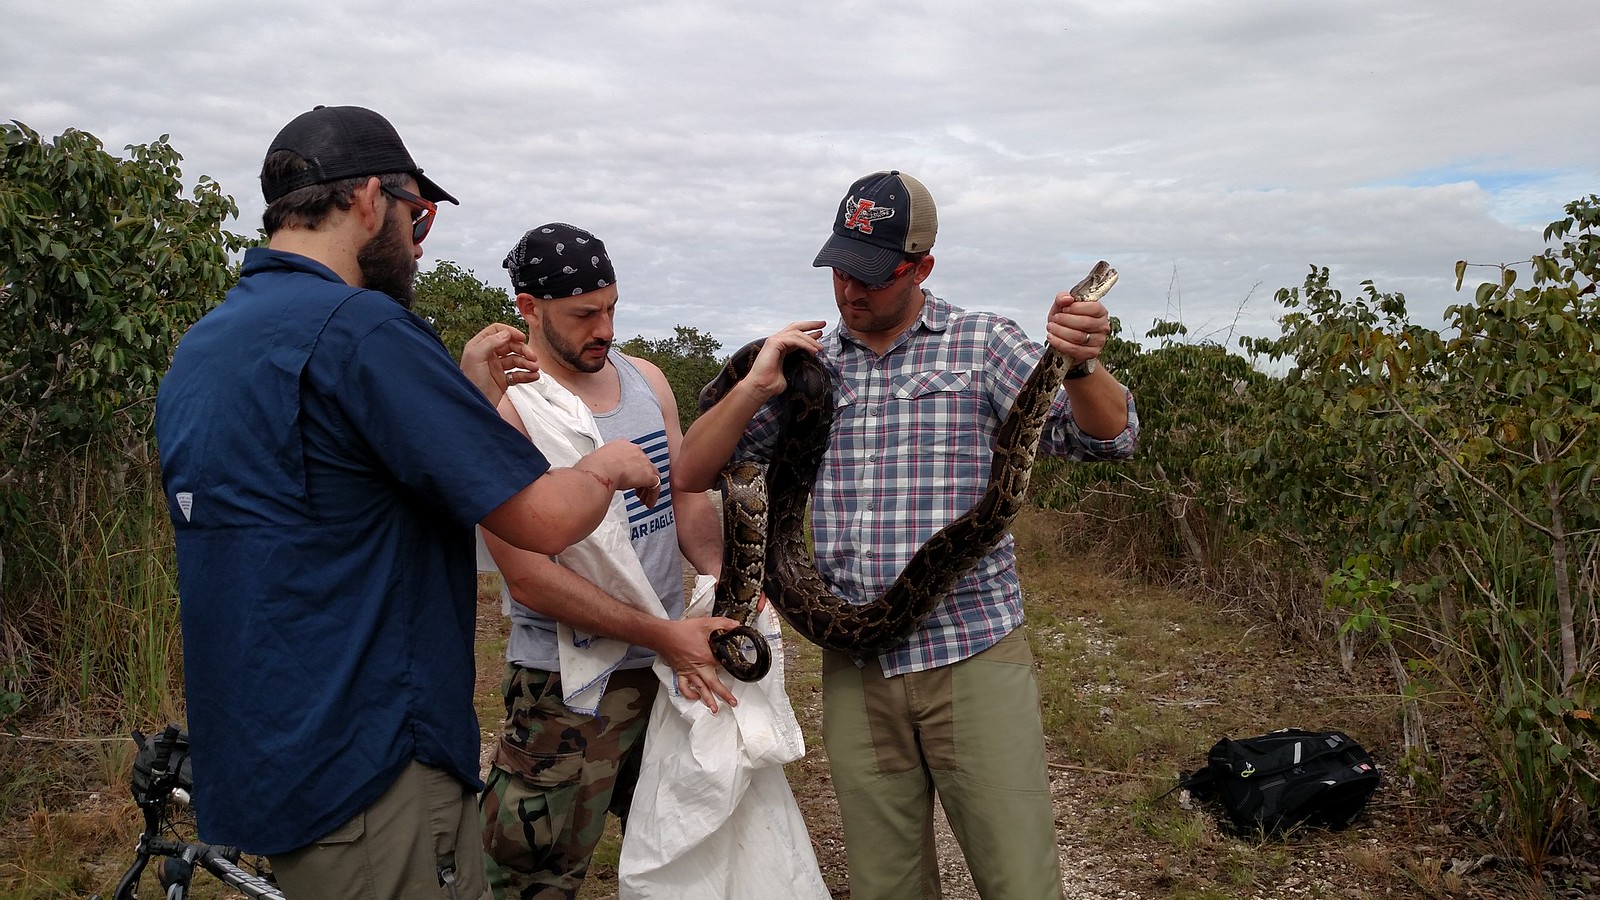 Sean Sterrett, David Steen, and Stephen Neslege placing a captured python in a large white bag